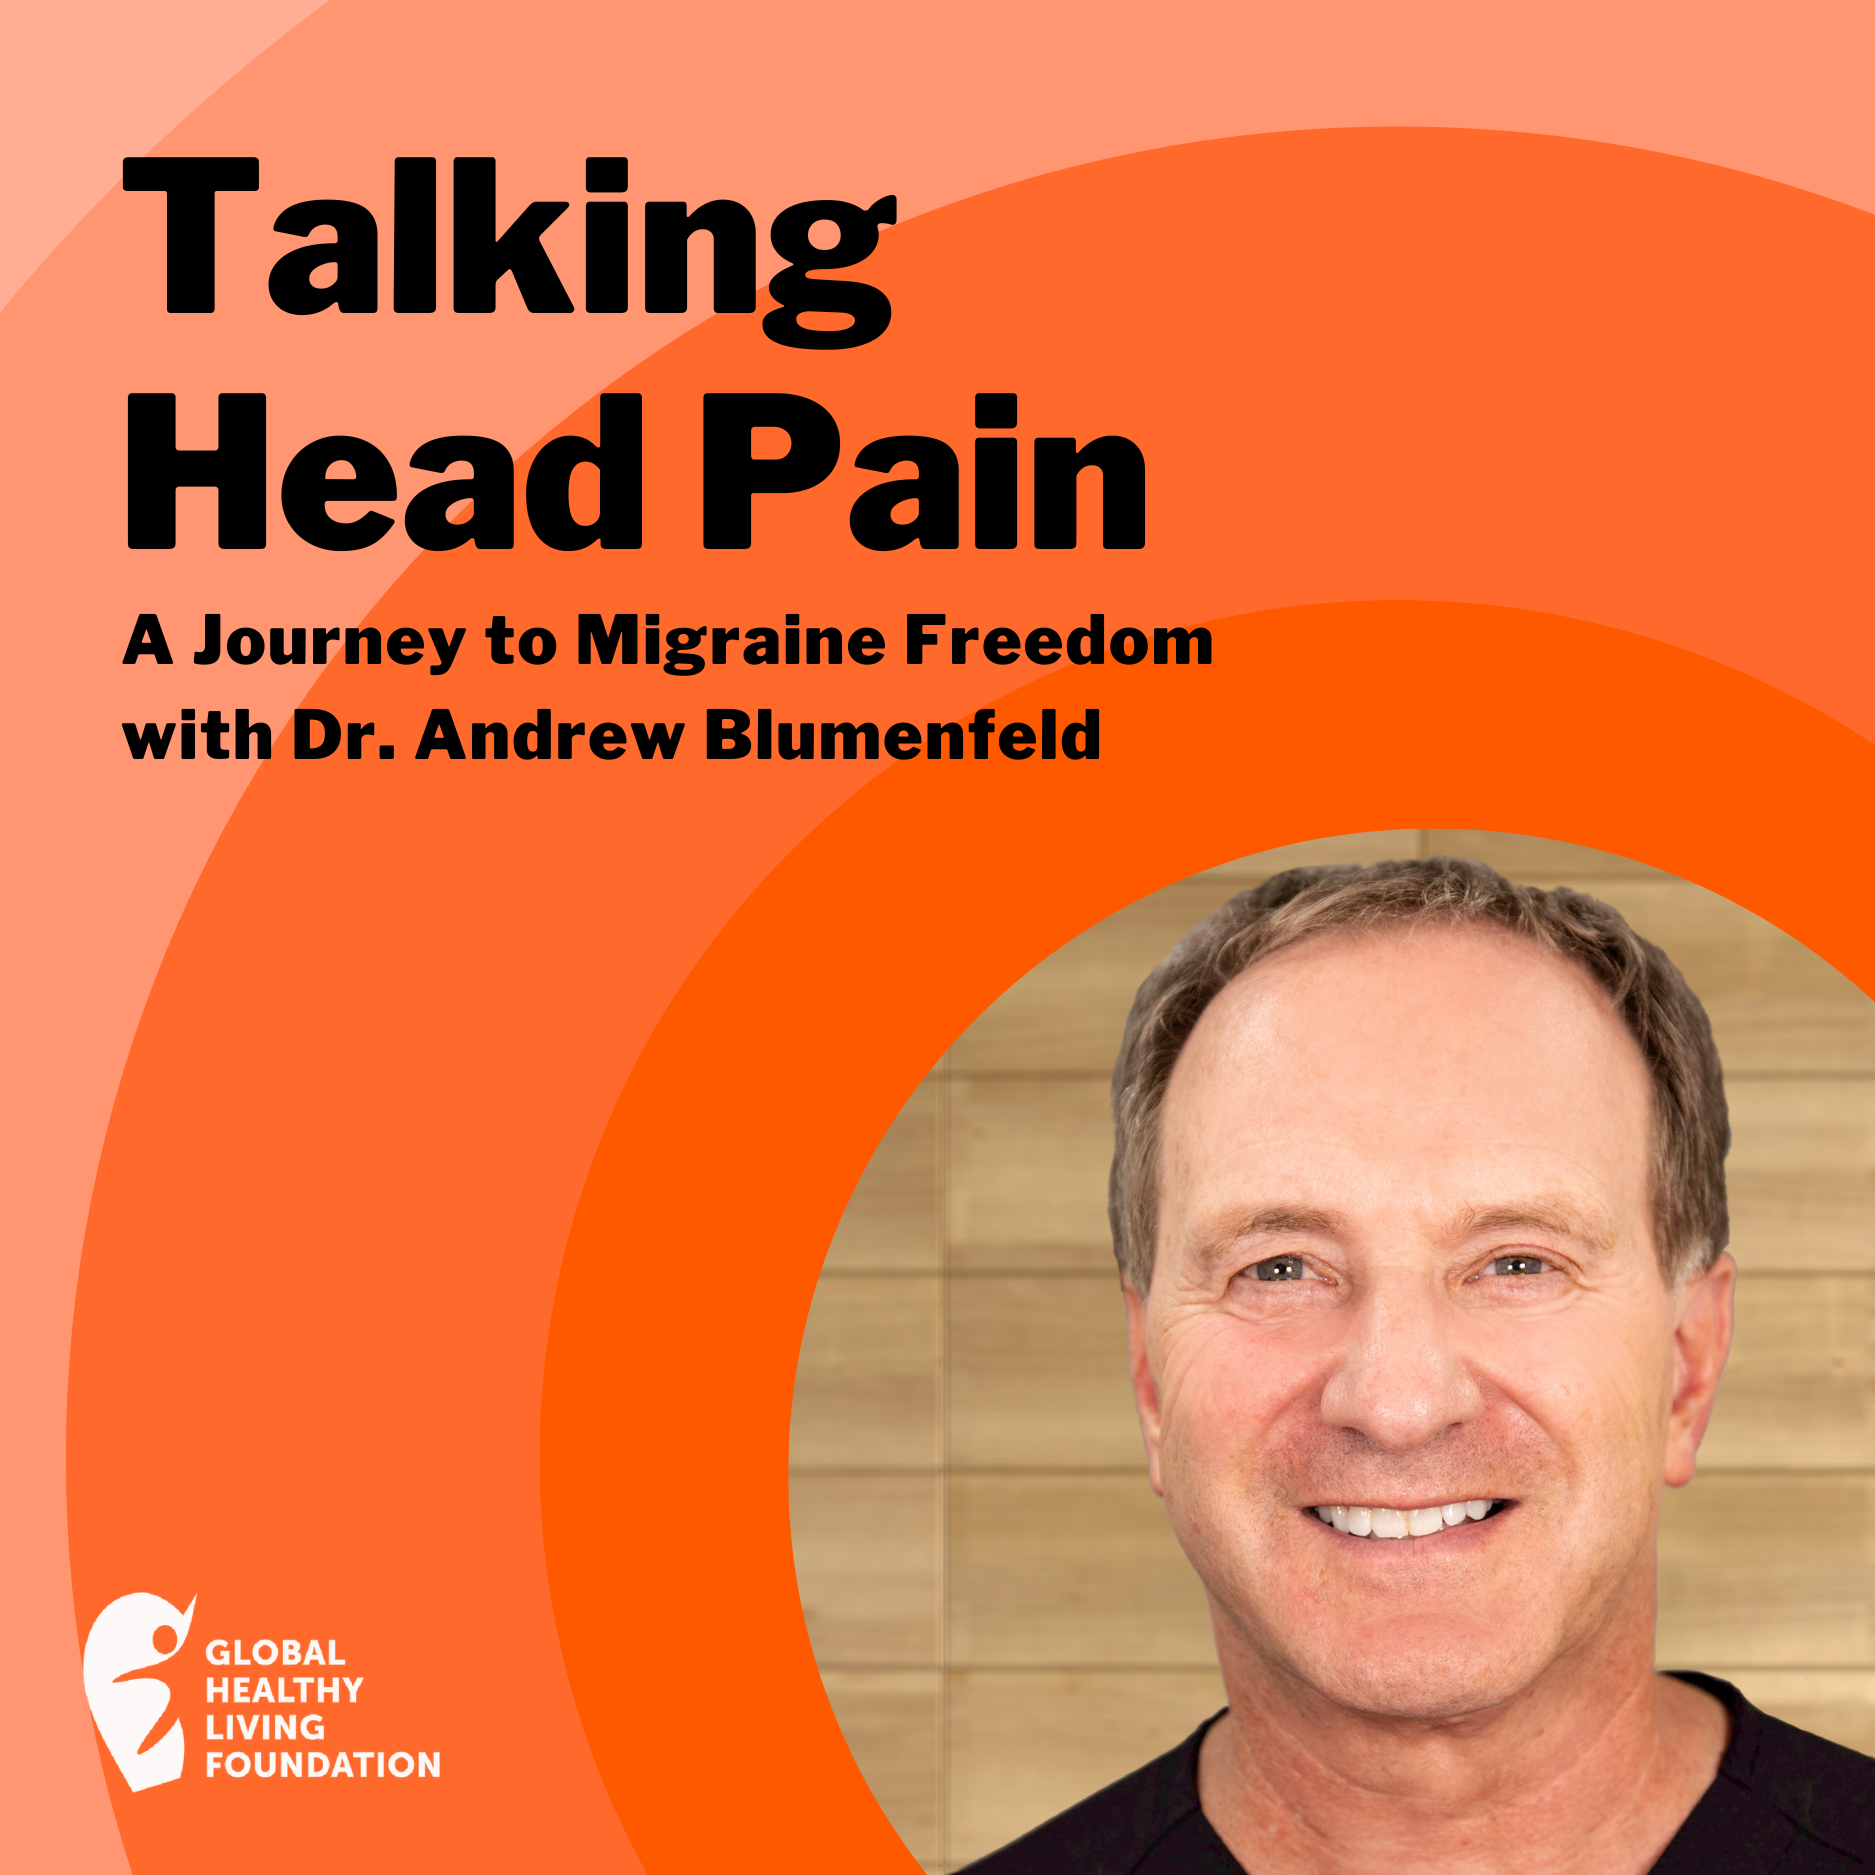 A Journey to Migraine Freedom with Dr. Andrew Blumenfeld